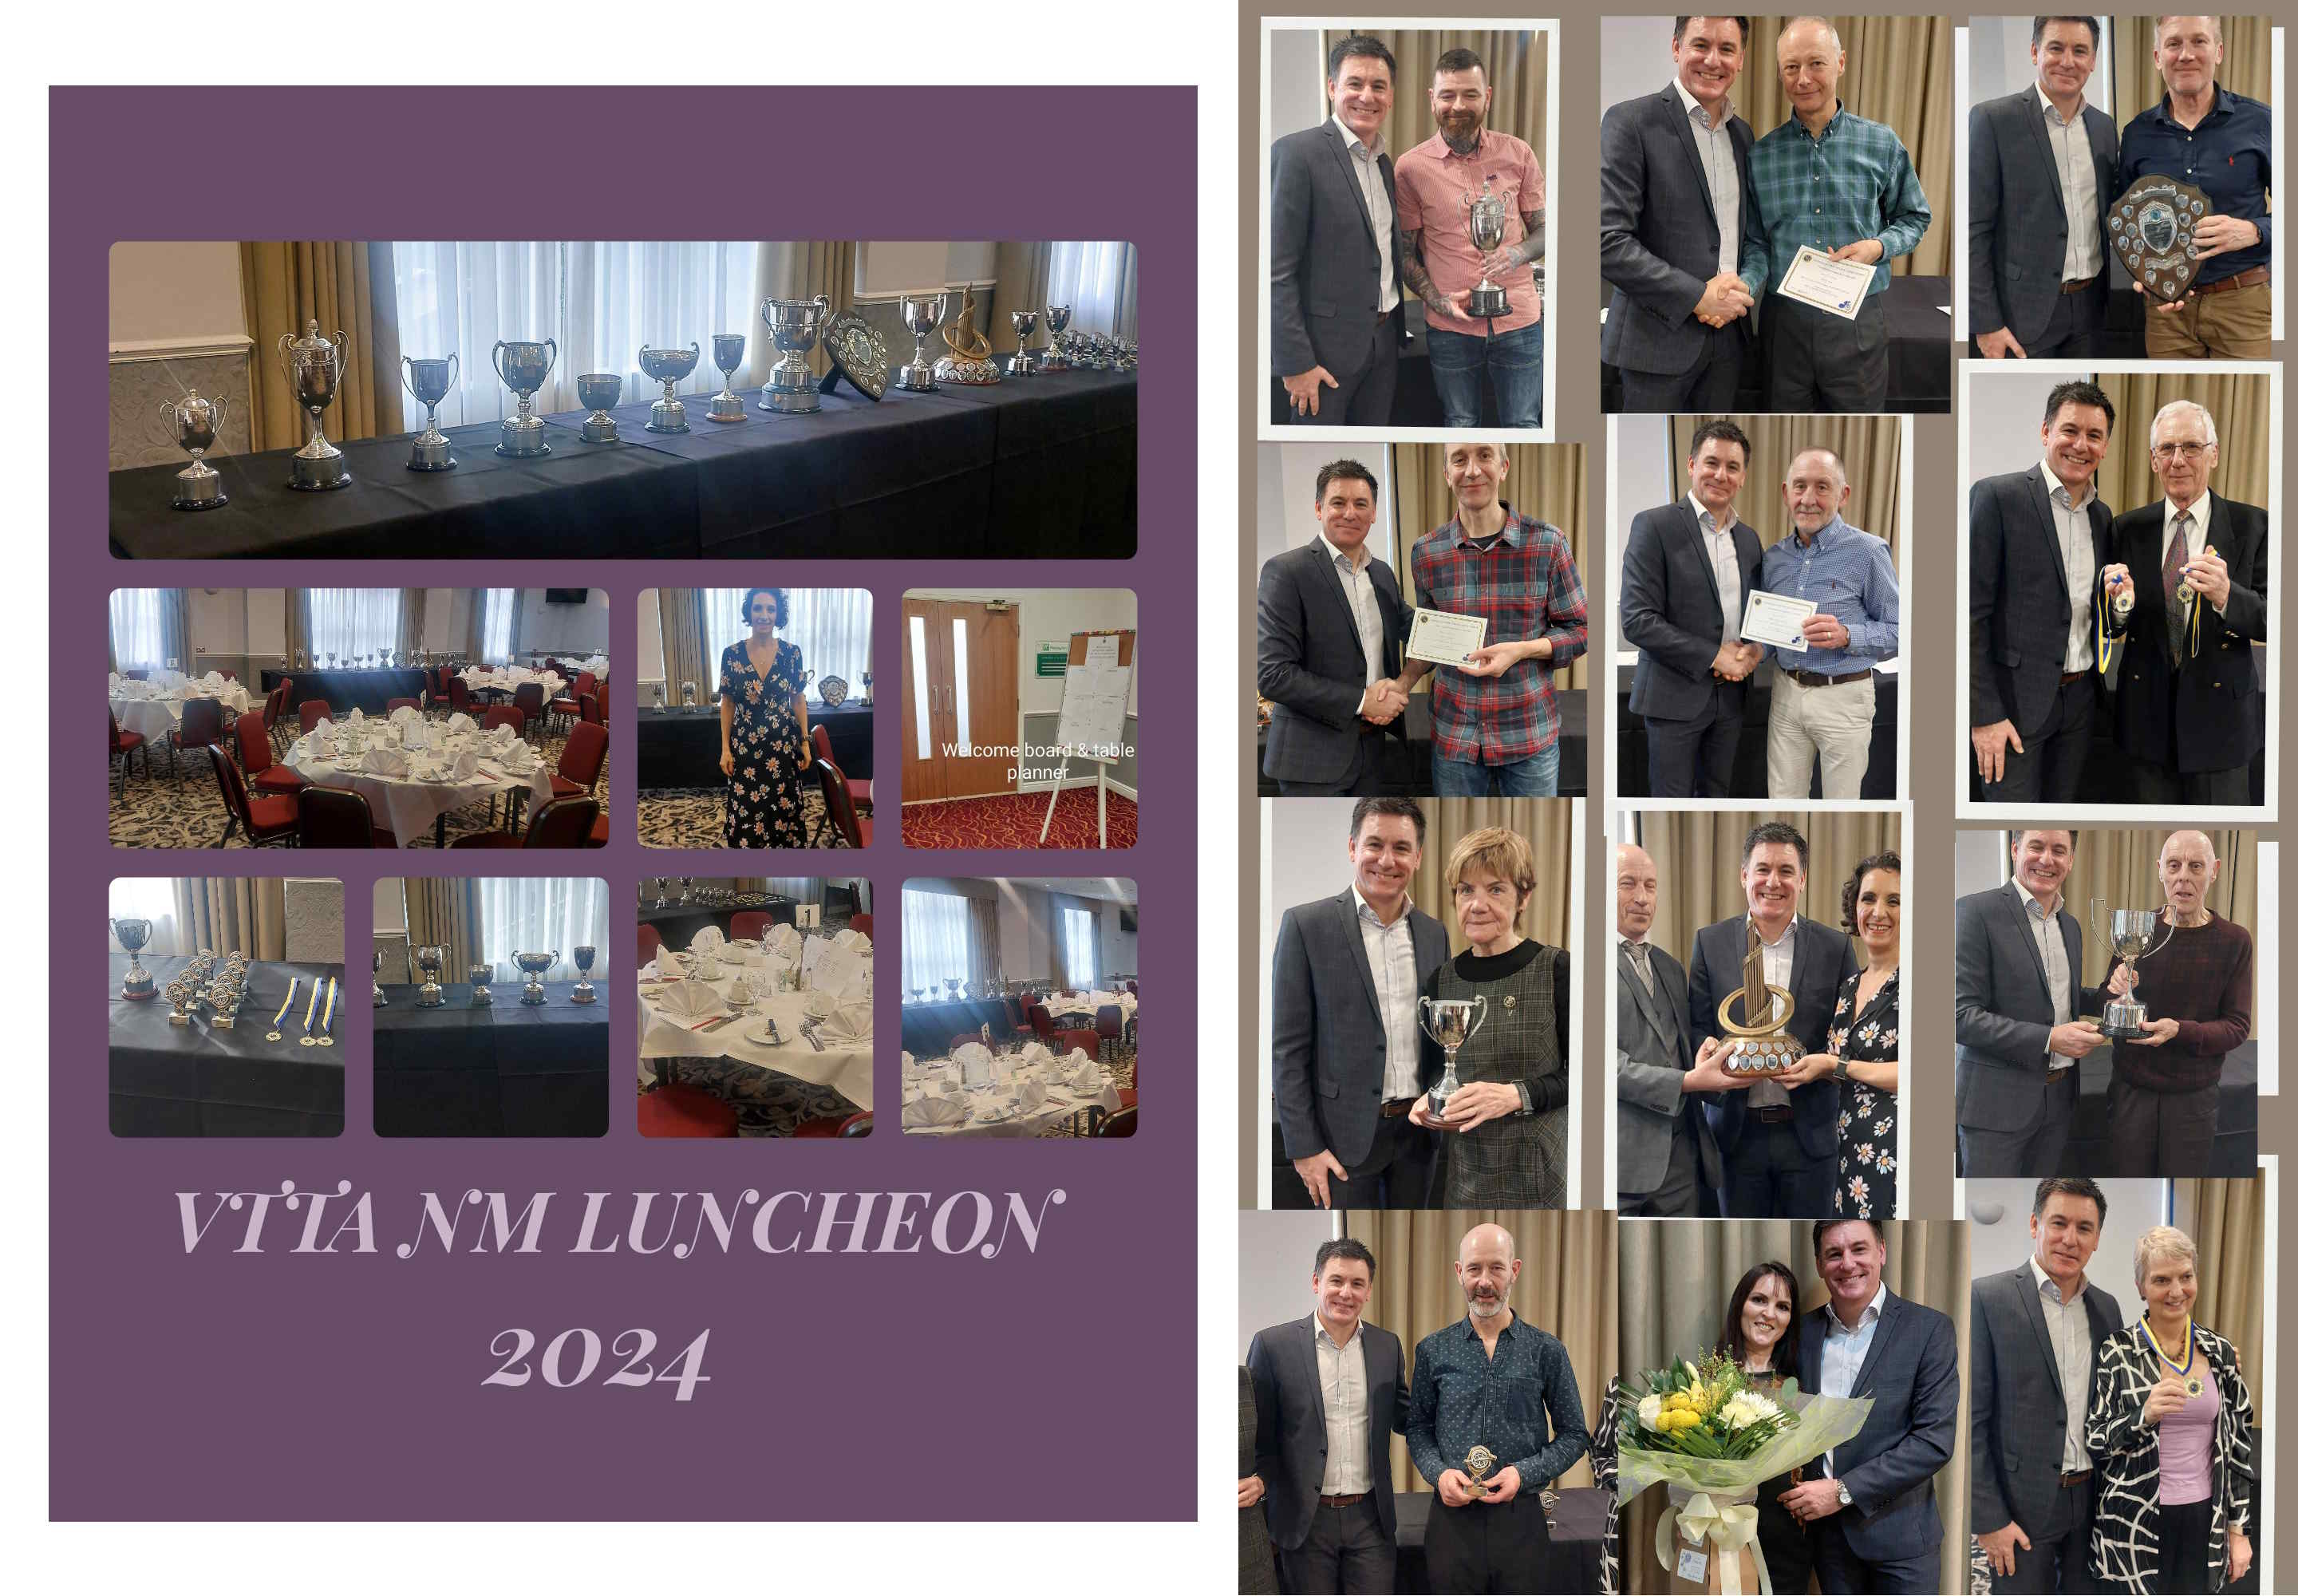 North Midlands: Annual Luncheon & Prize Presentation, February 2024